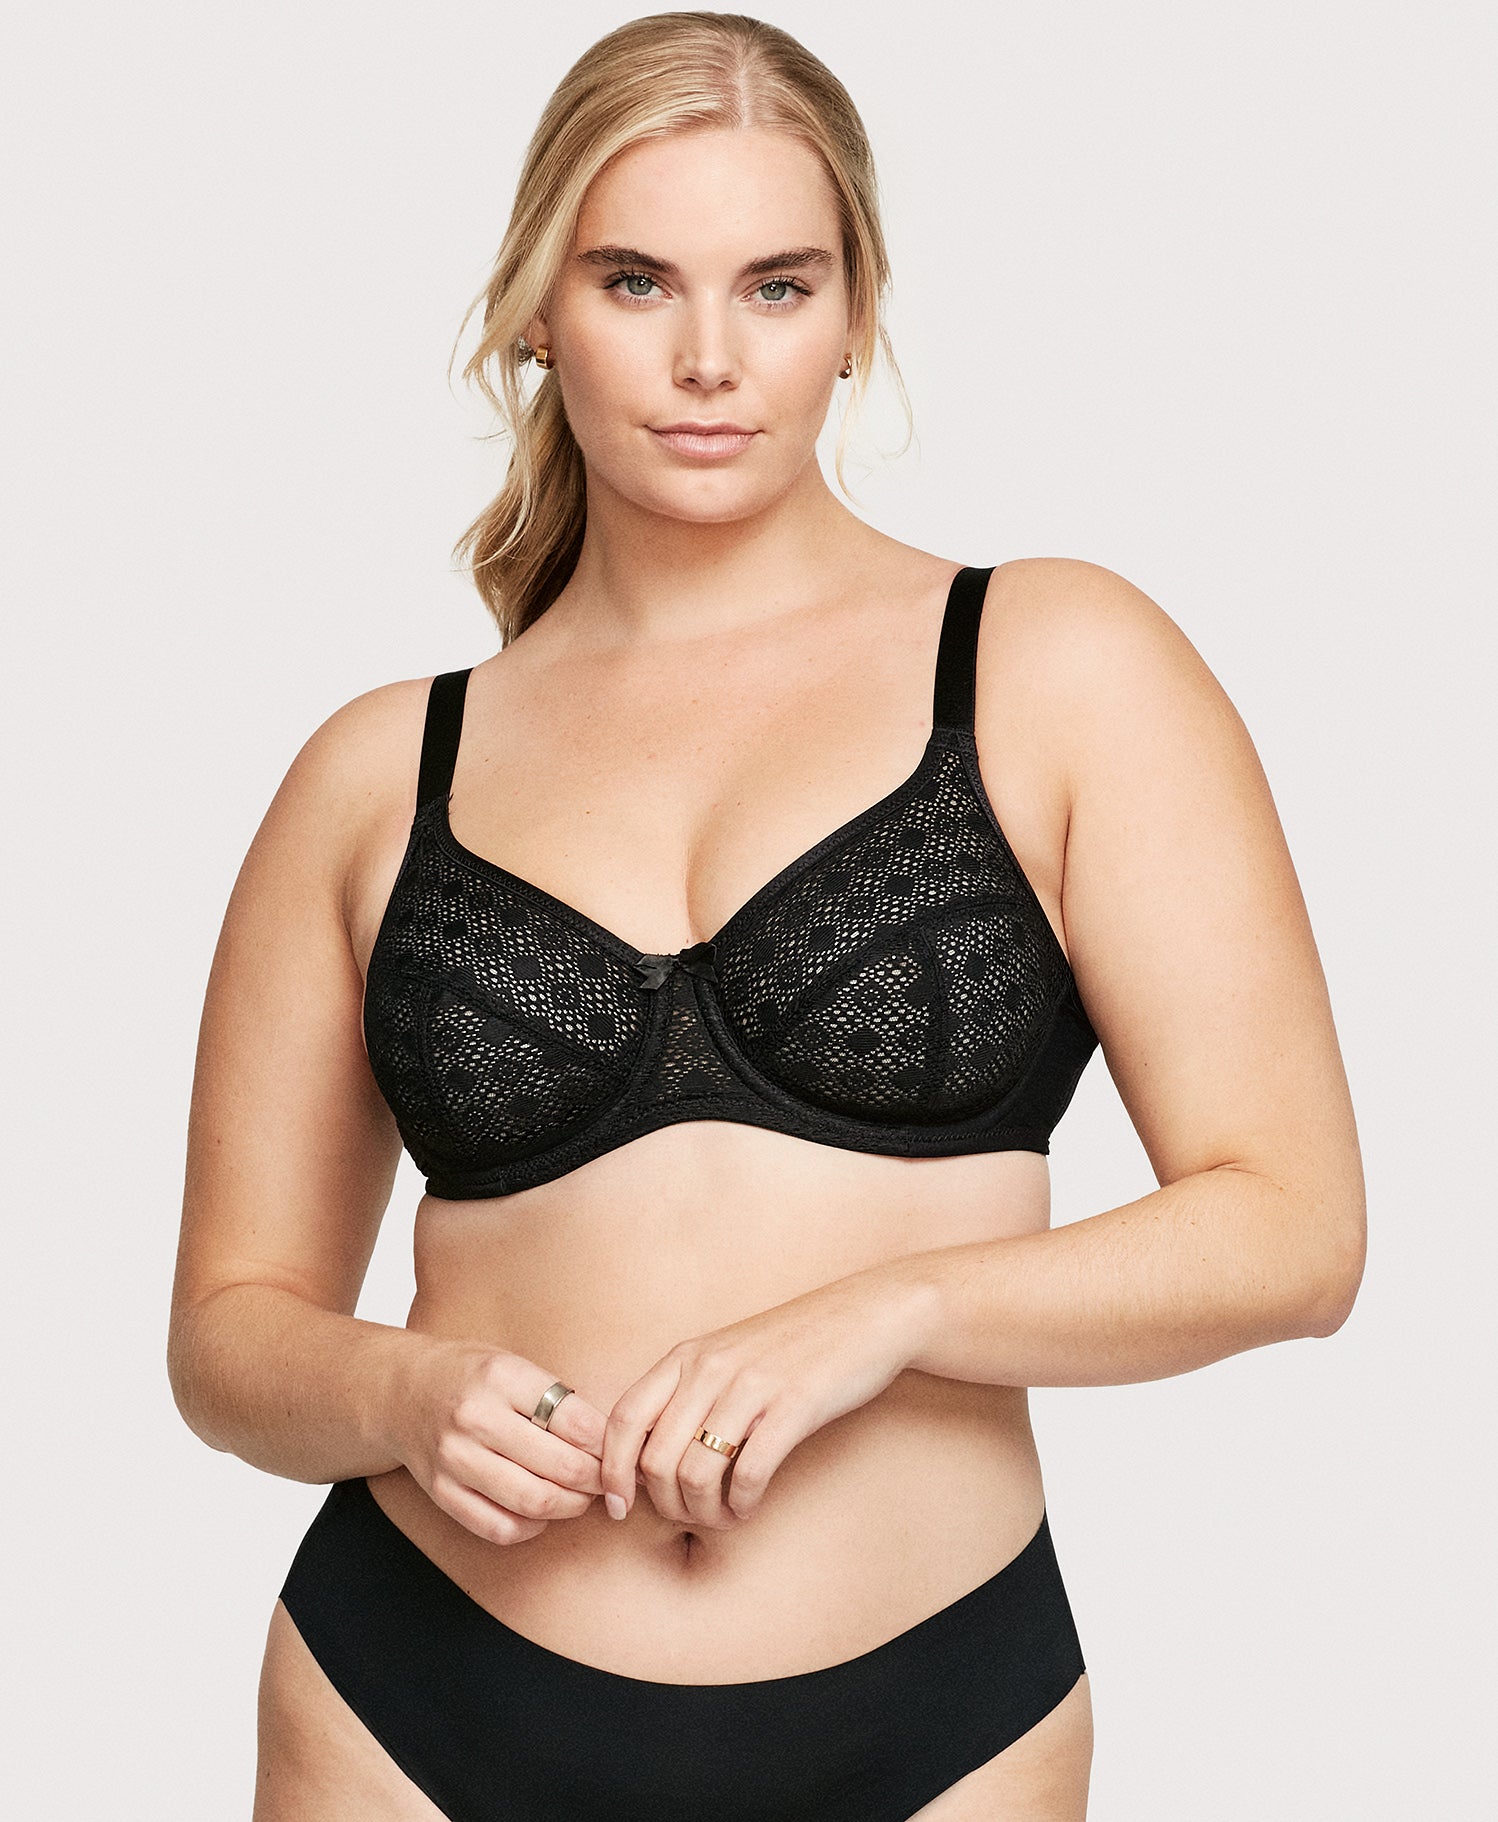 Women's Under-Wired Bra With Lace Front Design